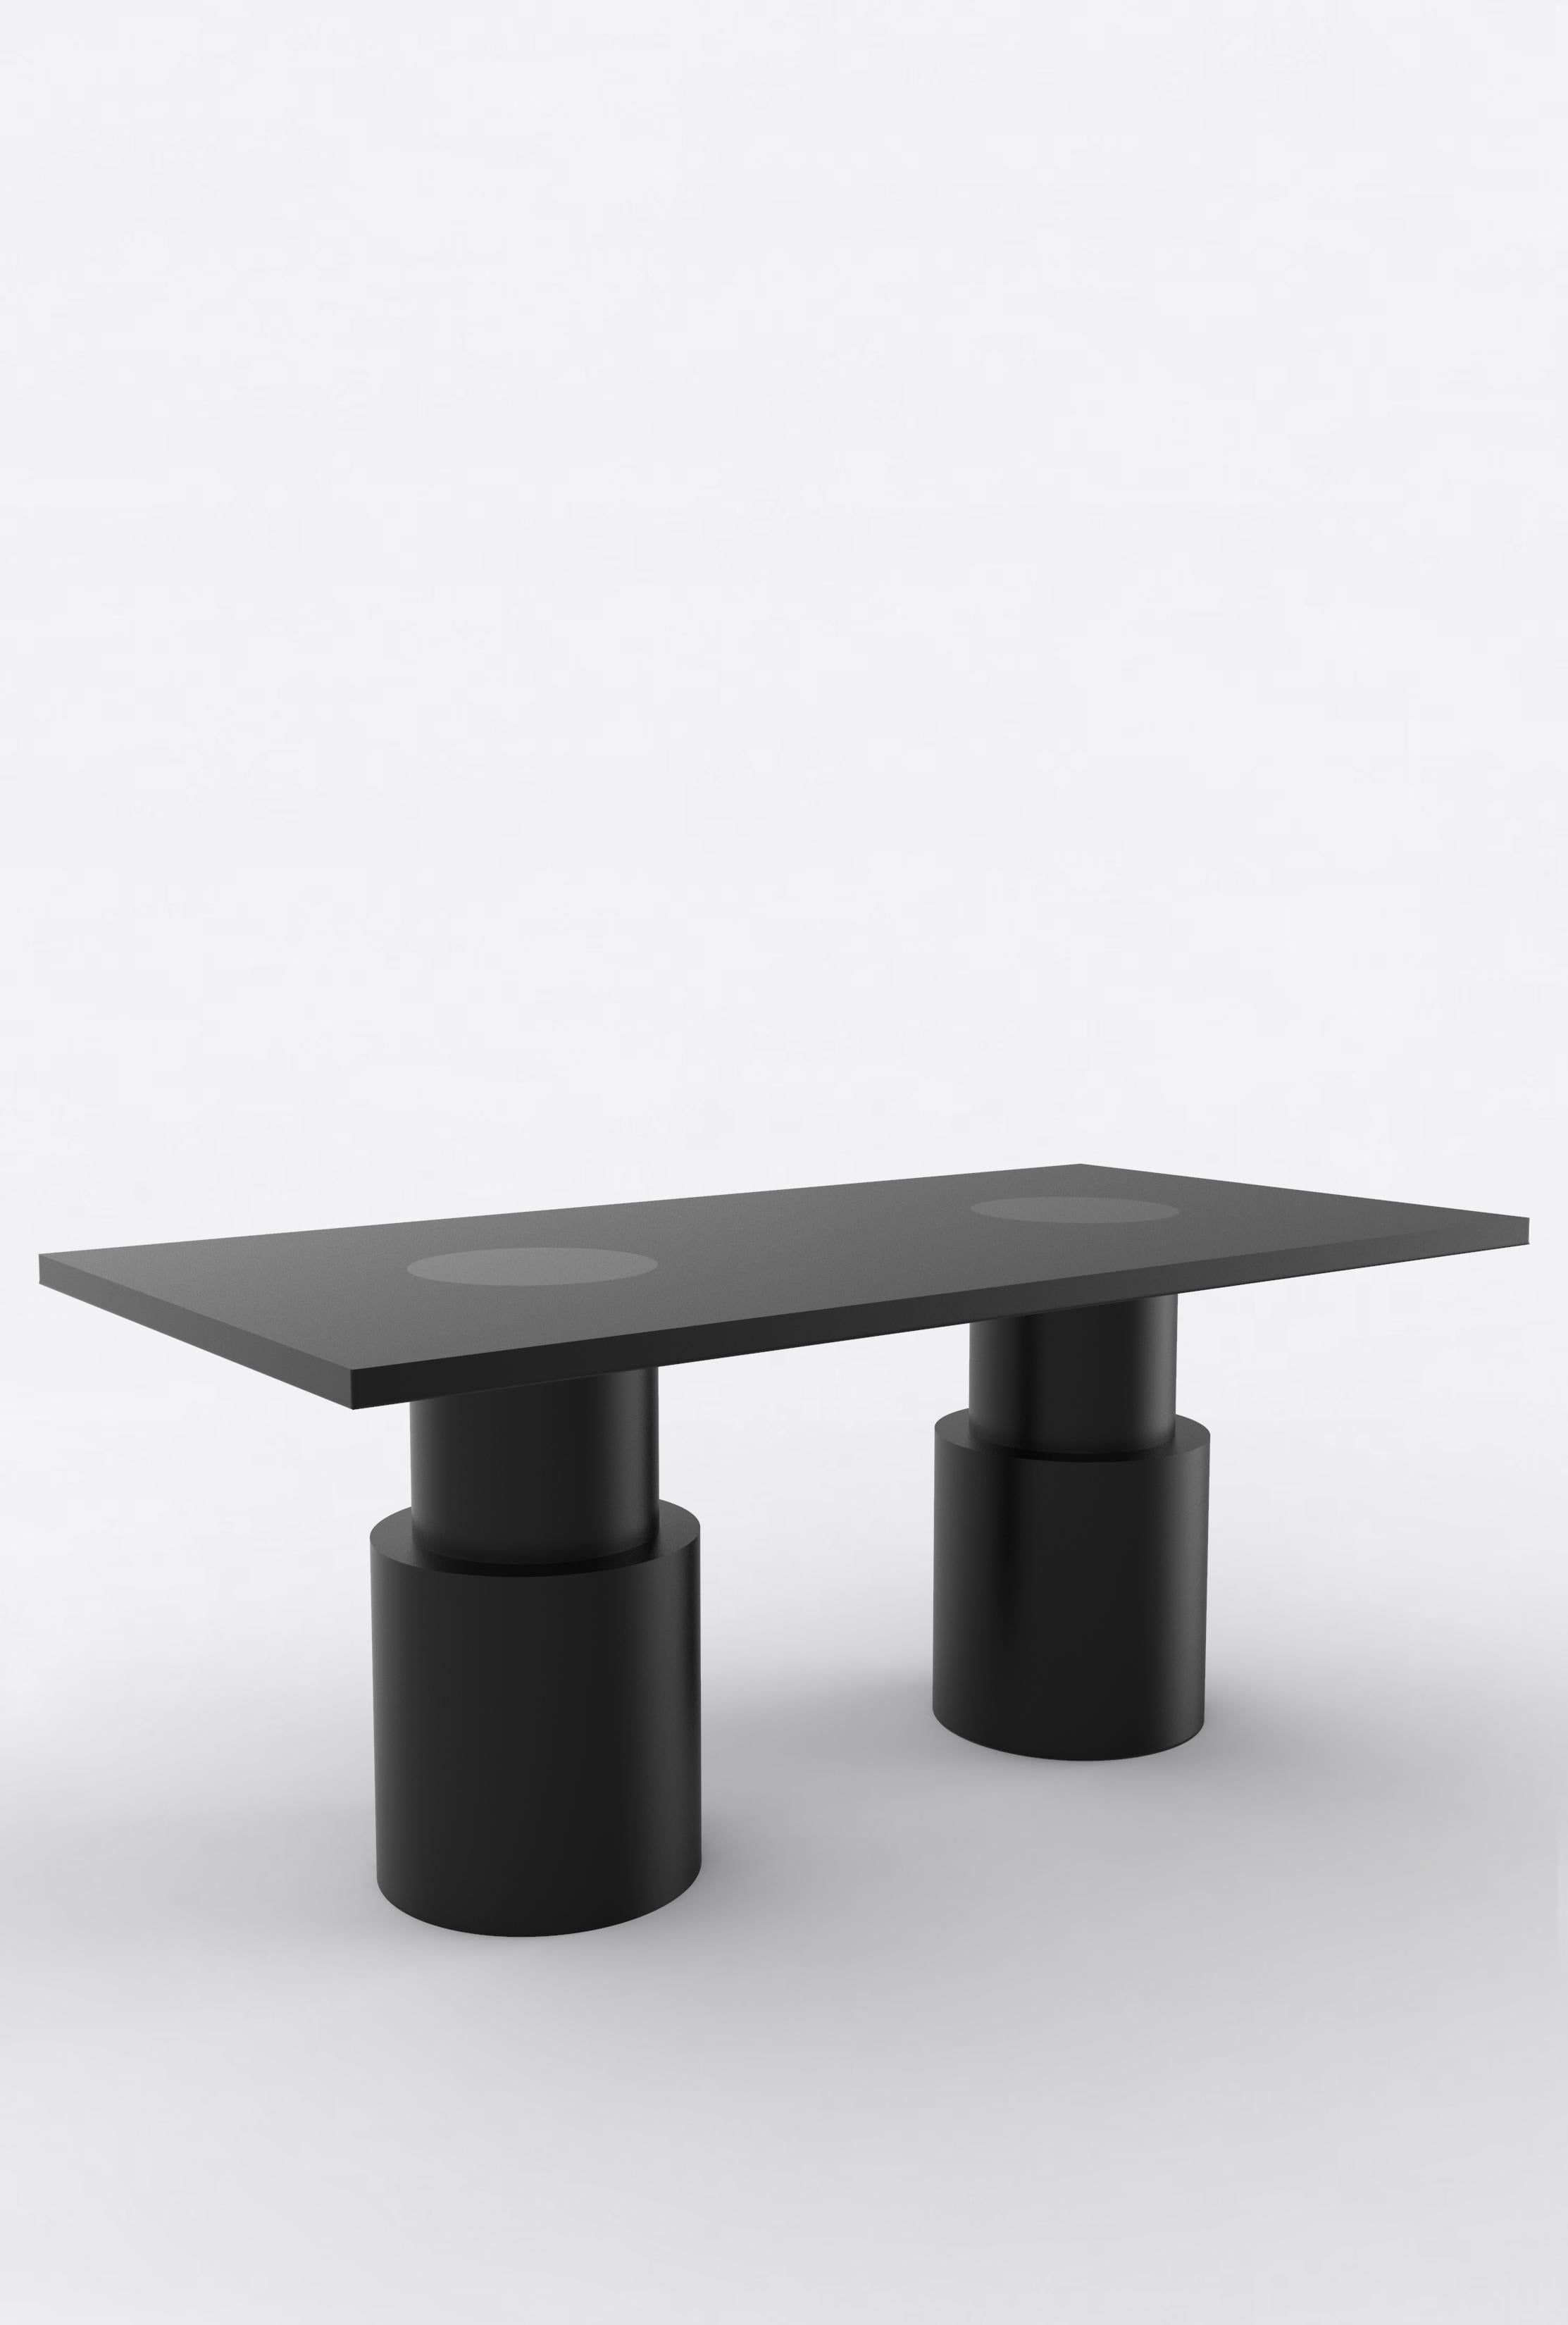 Orphan Work 102 Dining Table 
Shown in black.
Available with painted base and top.
Measures: 108” L X 36” W X 30” H
Dimensions available:
72” L x 36” W x 30” H
84” L x 36” W x 30” H
96” L x 36” W x 30” H
108” L x 42” W x 30” H
120” L x 42” W x 30”